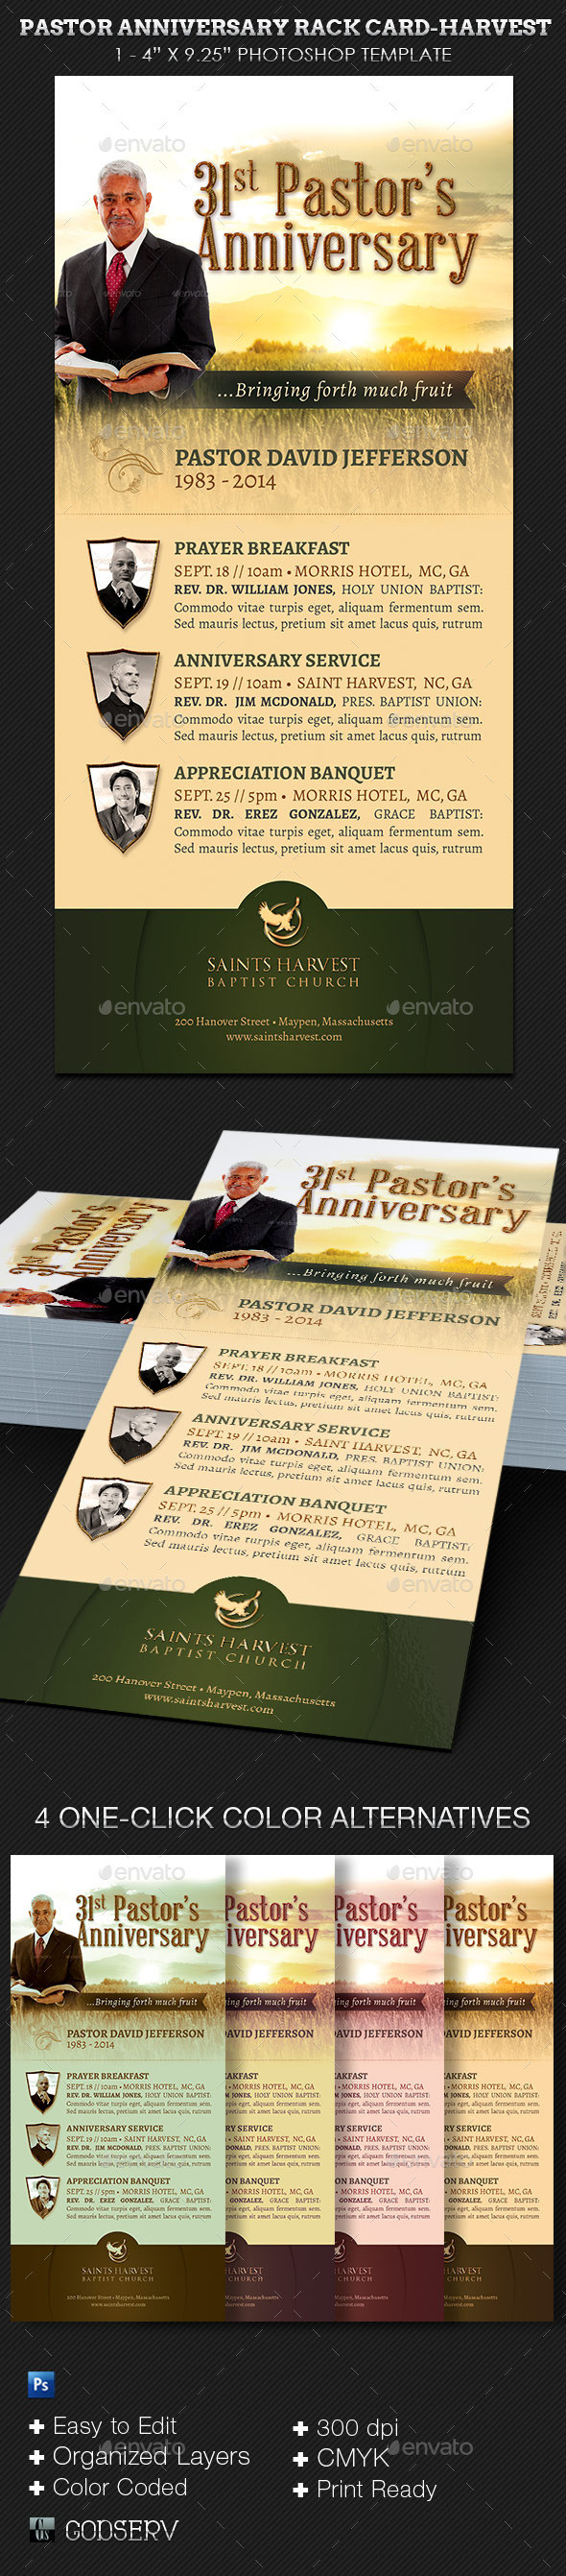 Pastor anniversary harvest rack card template preview